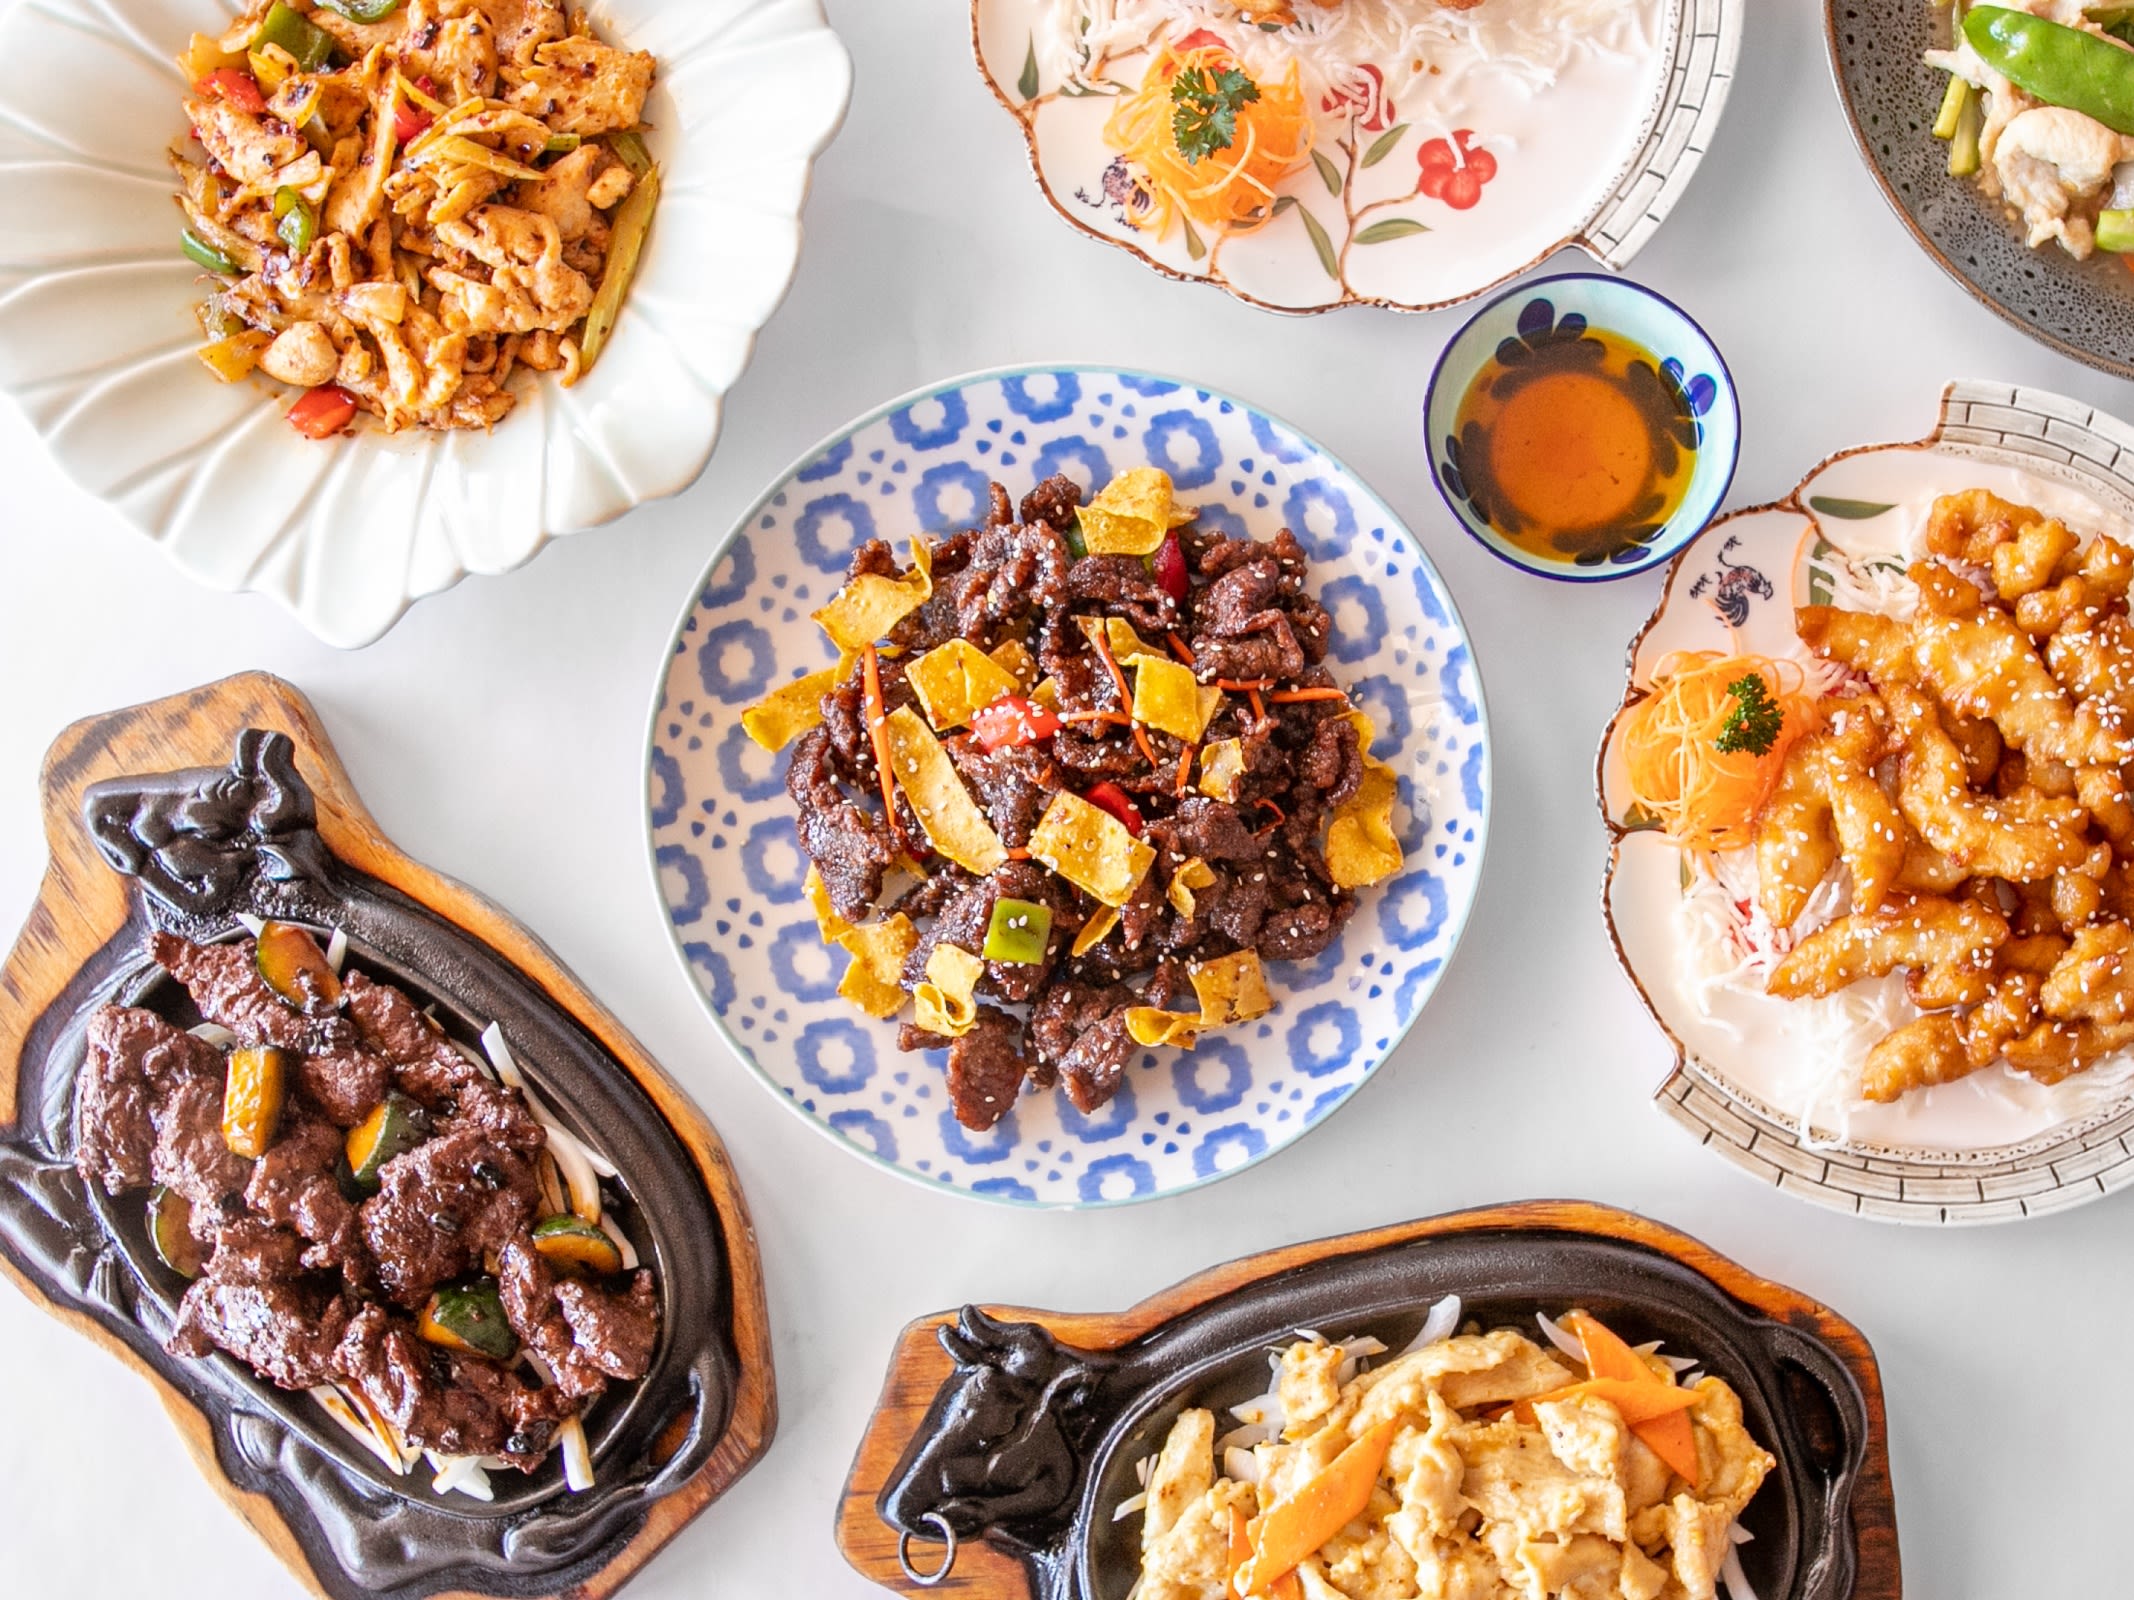 Chinese Takeaways and Restaurants Delivering Near Me | Order from Just Eat